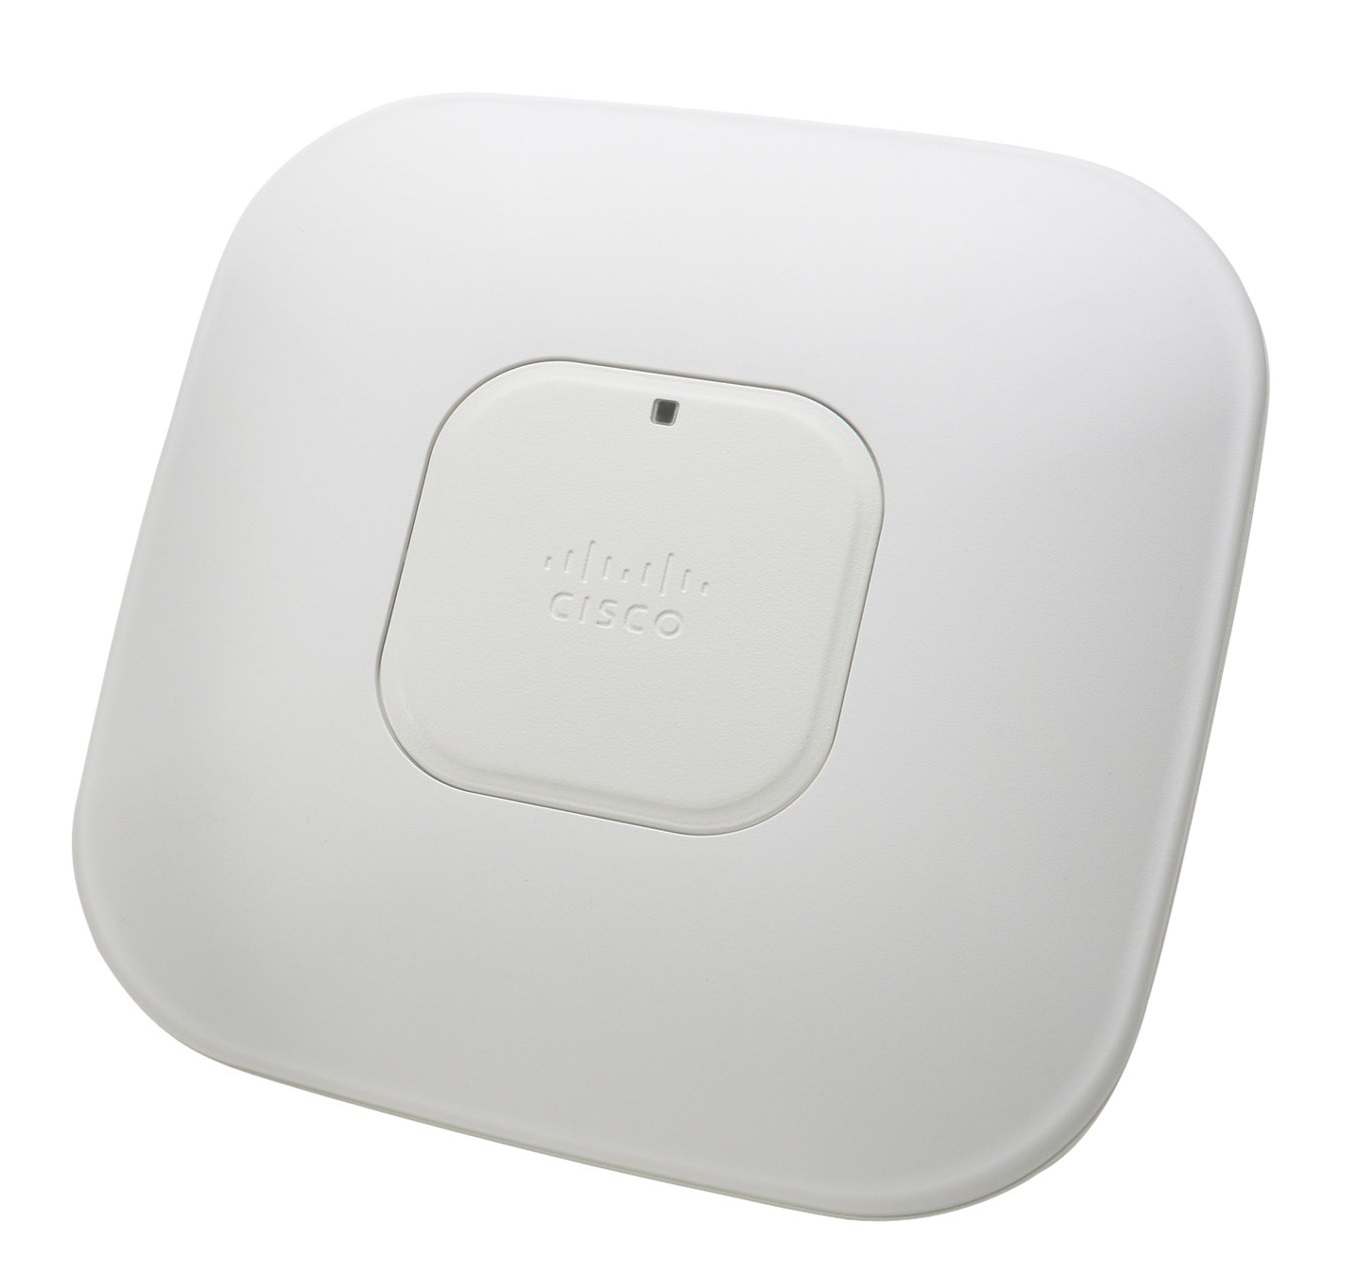 Cisco Aironet 3502I Wireless Access Point; Dual-band controller-based 802.11a/g/n 